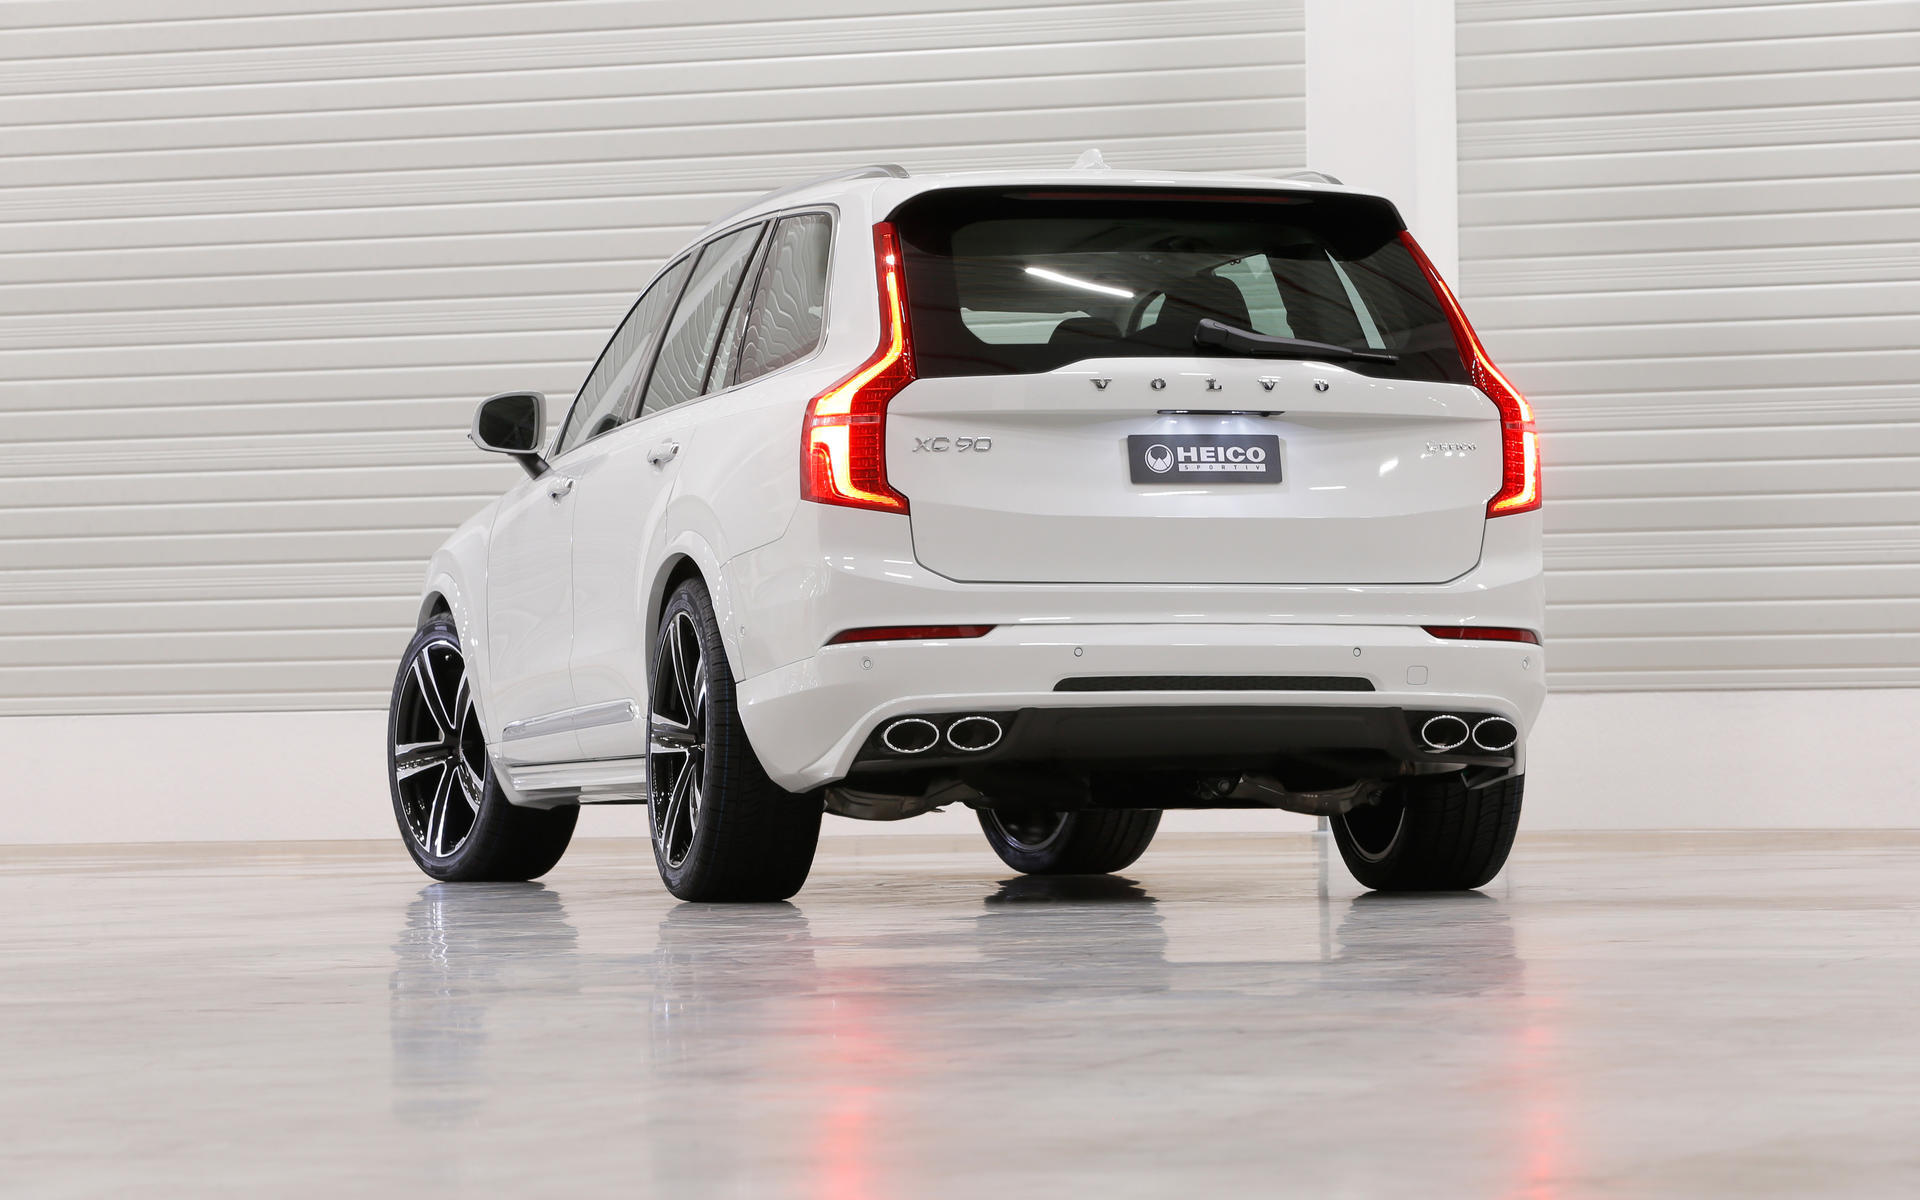 Check our price and buy Heico Sportiv Body Kit for Volvo XC90